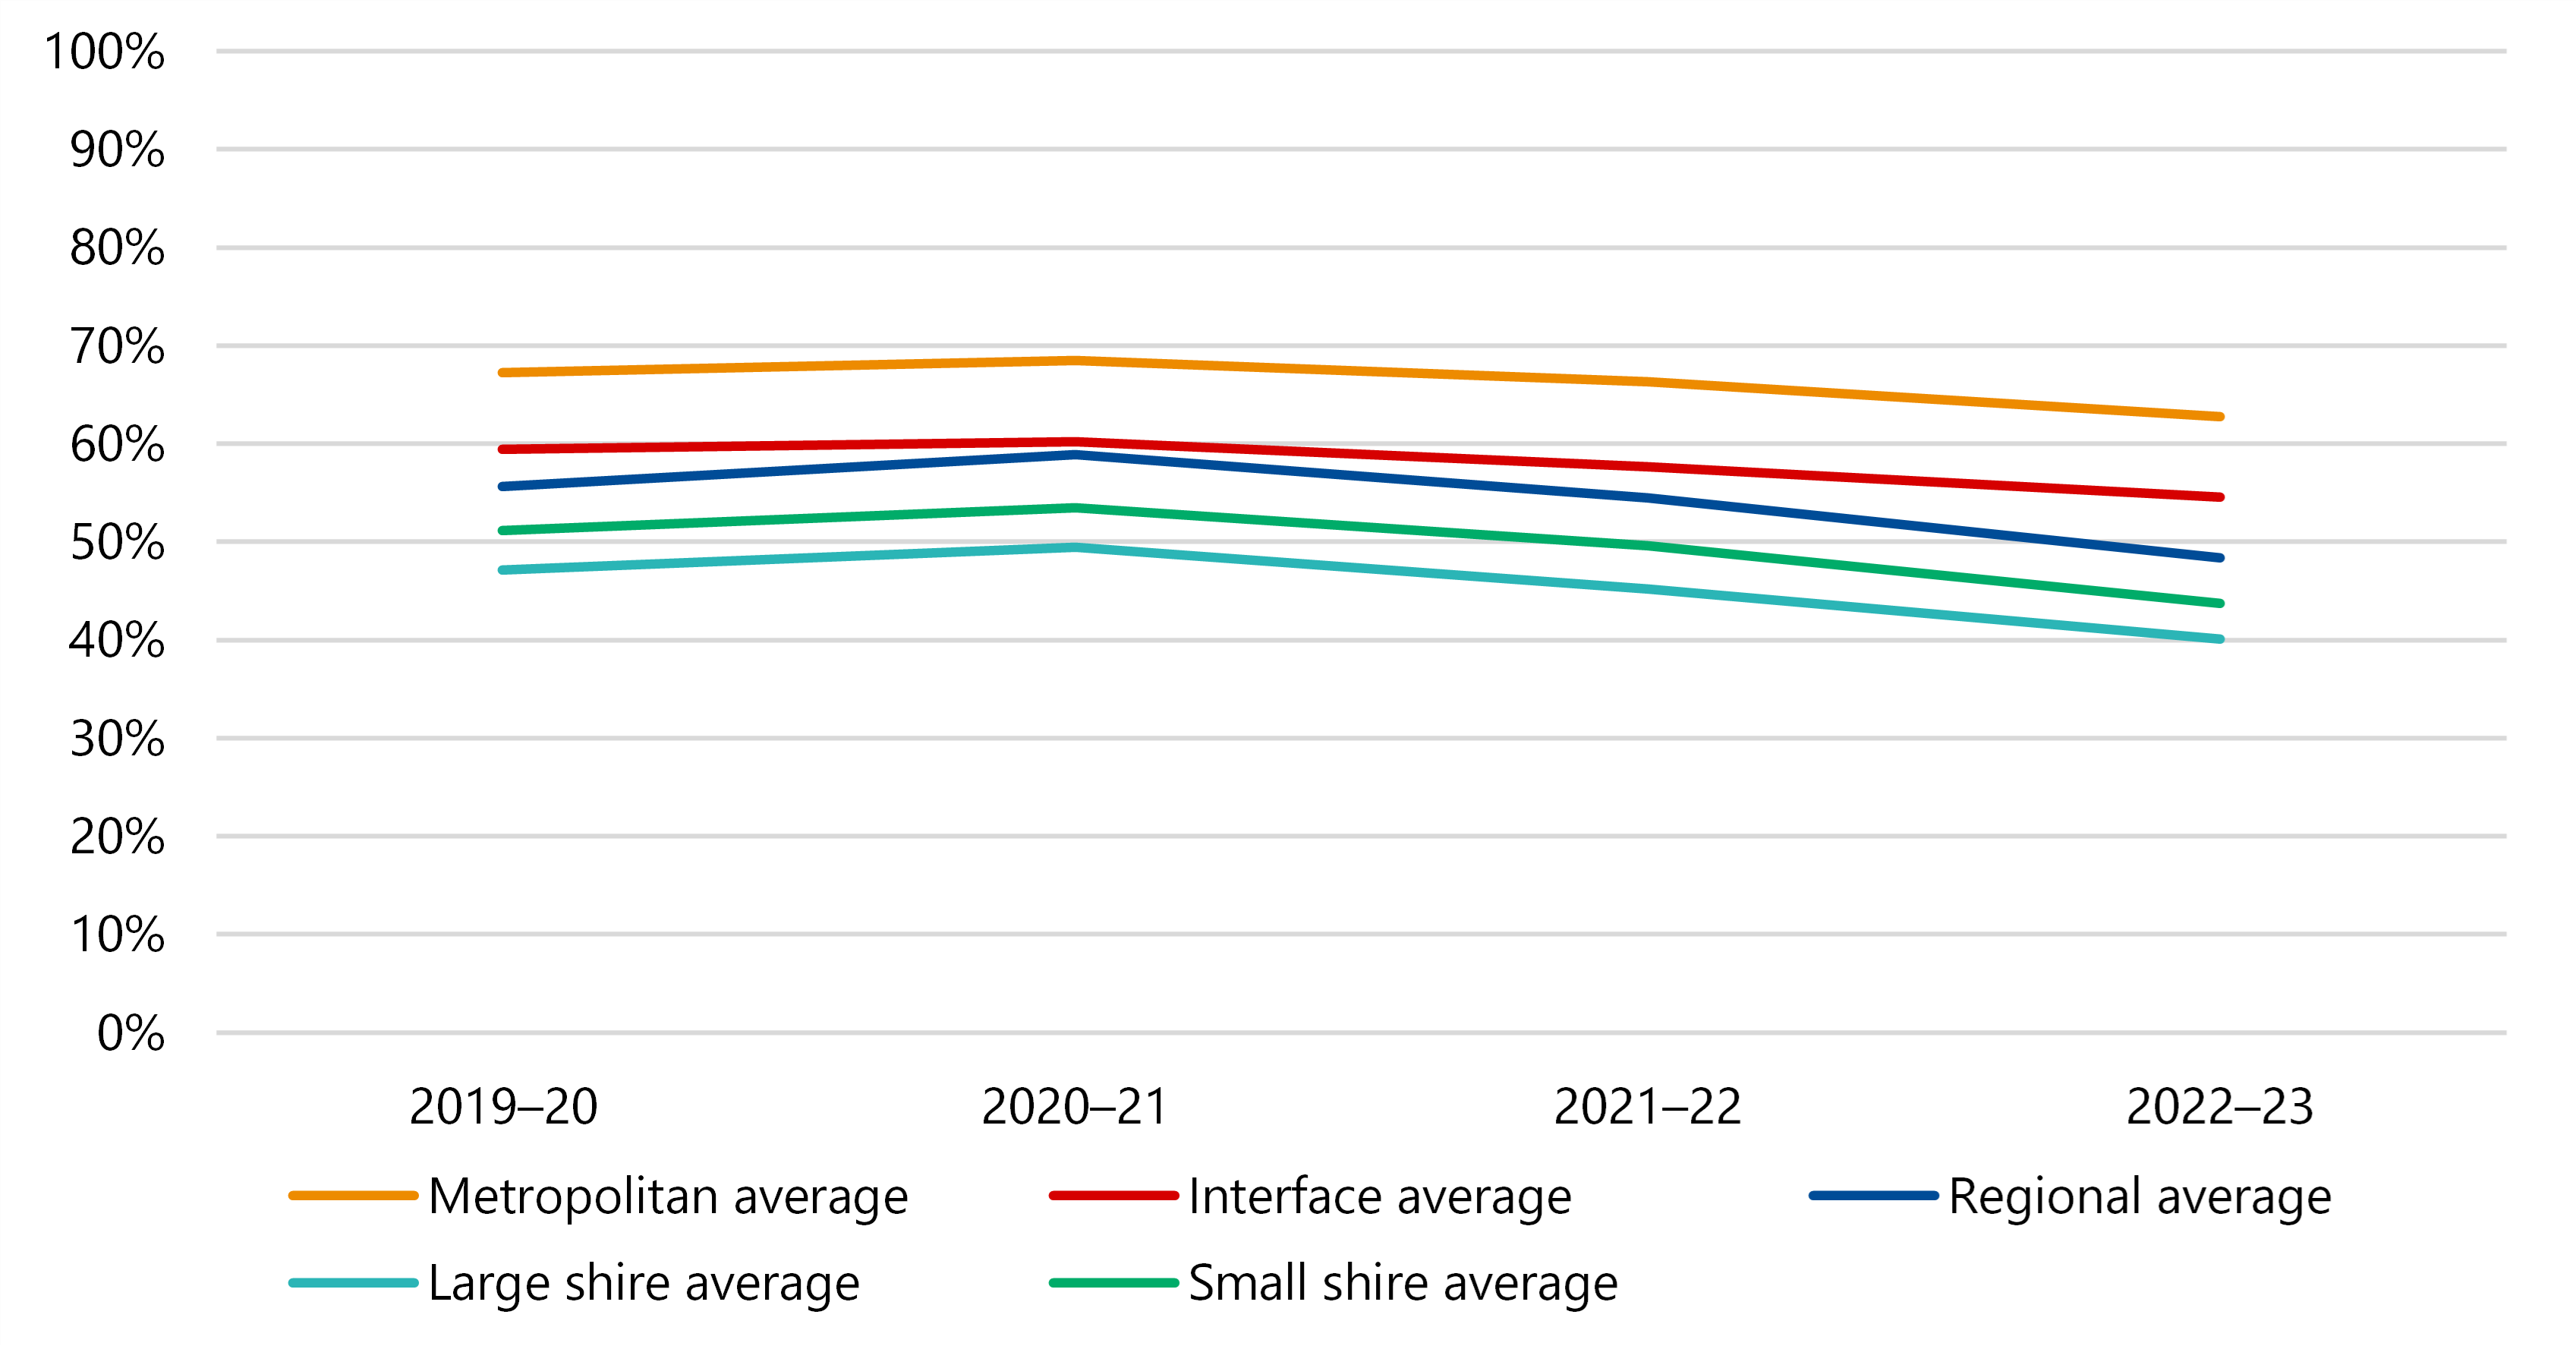 Figure 17 is a stacked line graph showing that average road satisfaction between 2019–20 and 2022–23 was highest for metro councils, starting at about 68% and ending at about 62%. For interface councils, it varied from 60% toa bout 55%. For regional councils, it started at about 57%, rose to nearly 60% in 2020–21, then fell away to below 50% in 2022–23. For large shire councils, it started at a bit over 50%, rose to about 54% in 2020–21, then fell away to about 44% in 2022–23. For small shire councils, it began at about 48% in 2019–20, rose to 50% the following year, but had dropped to 40% by 2022–23.